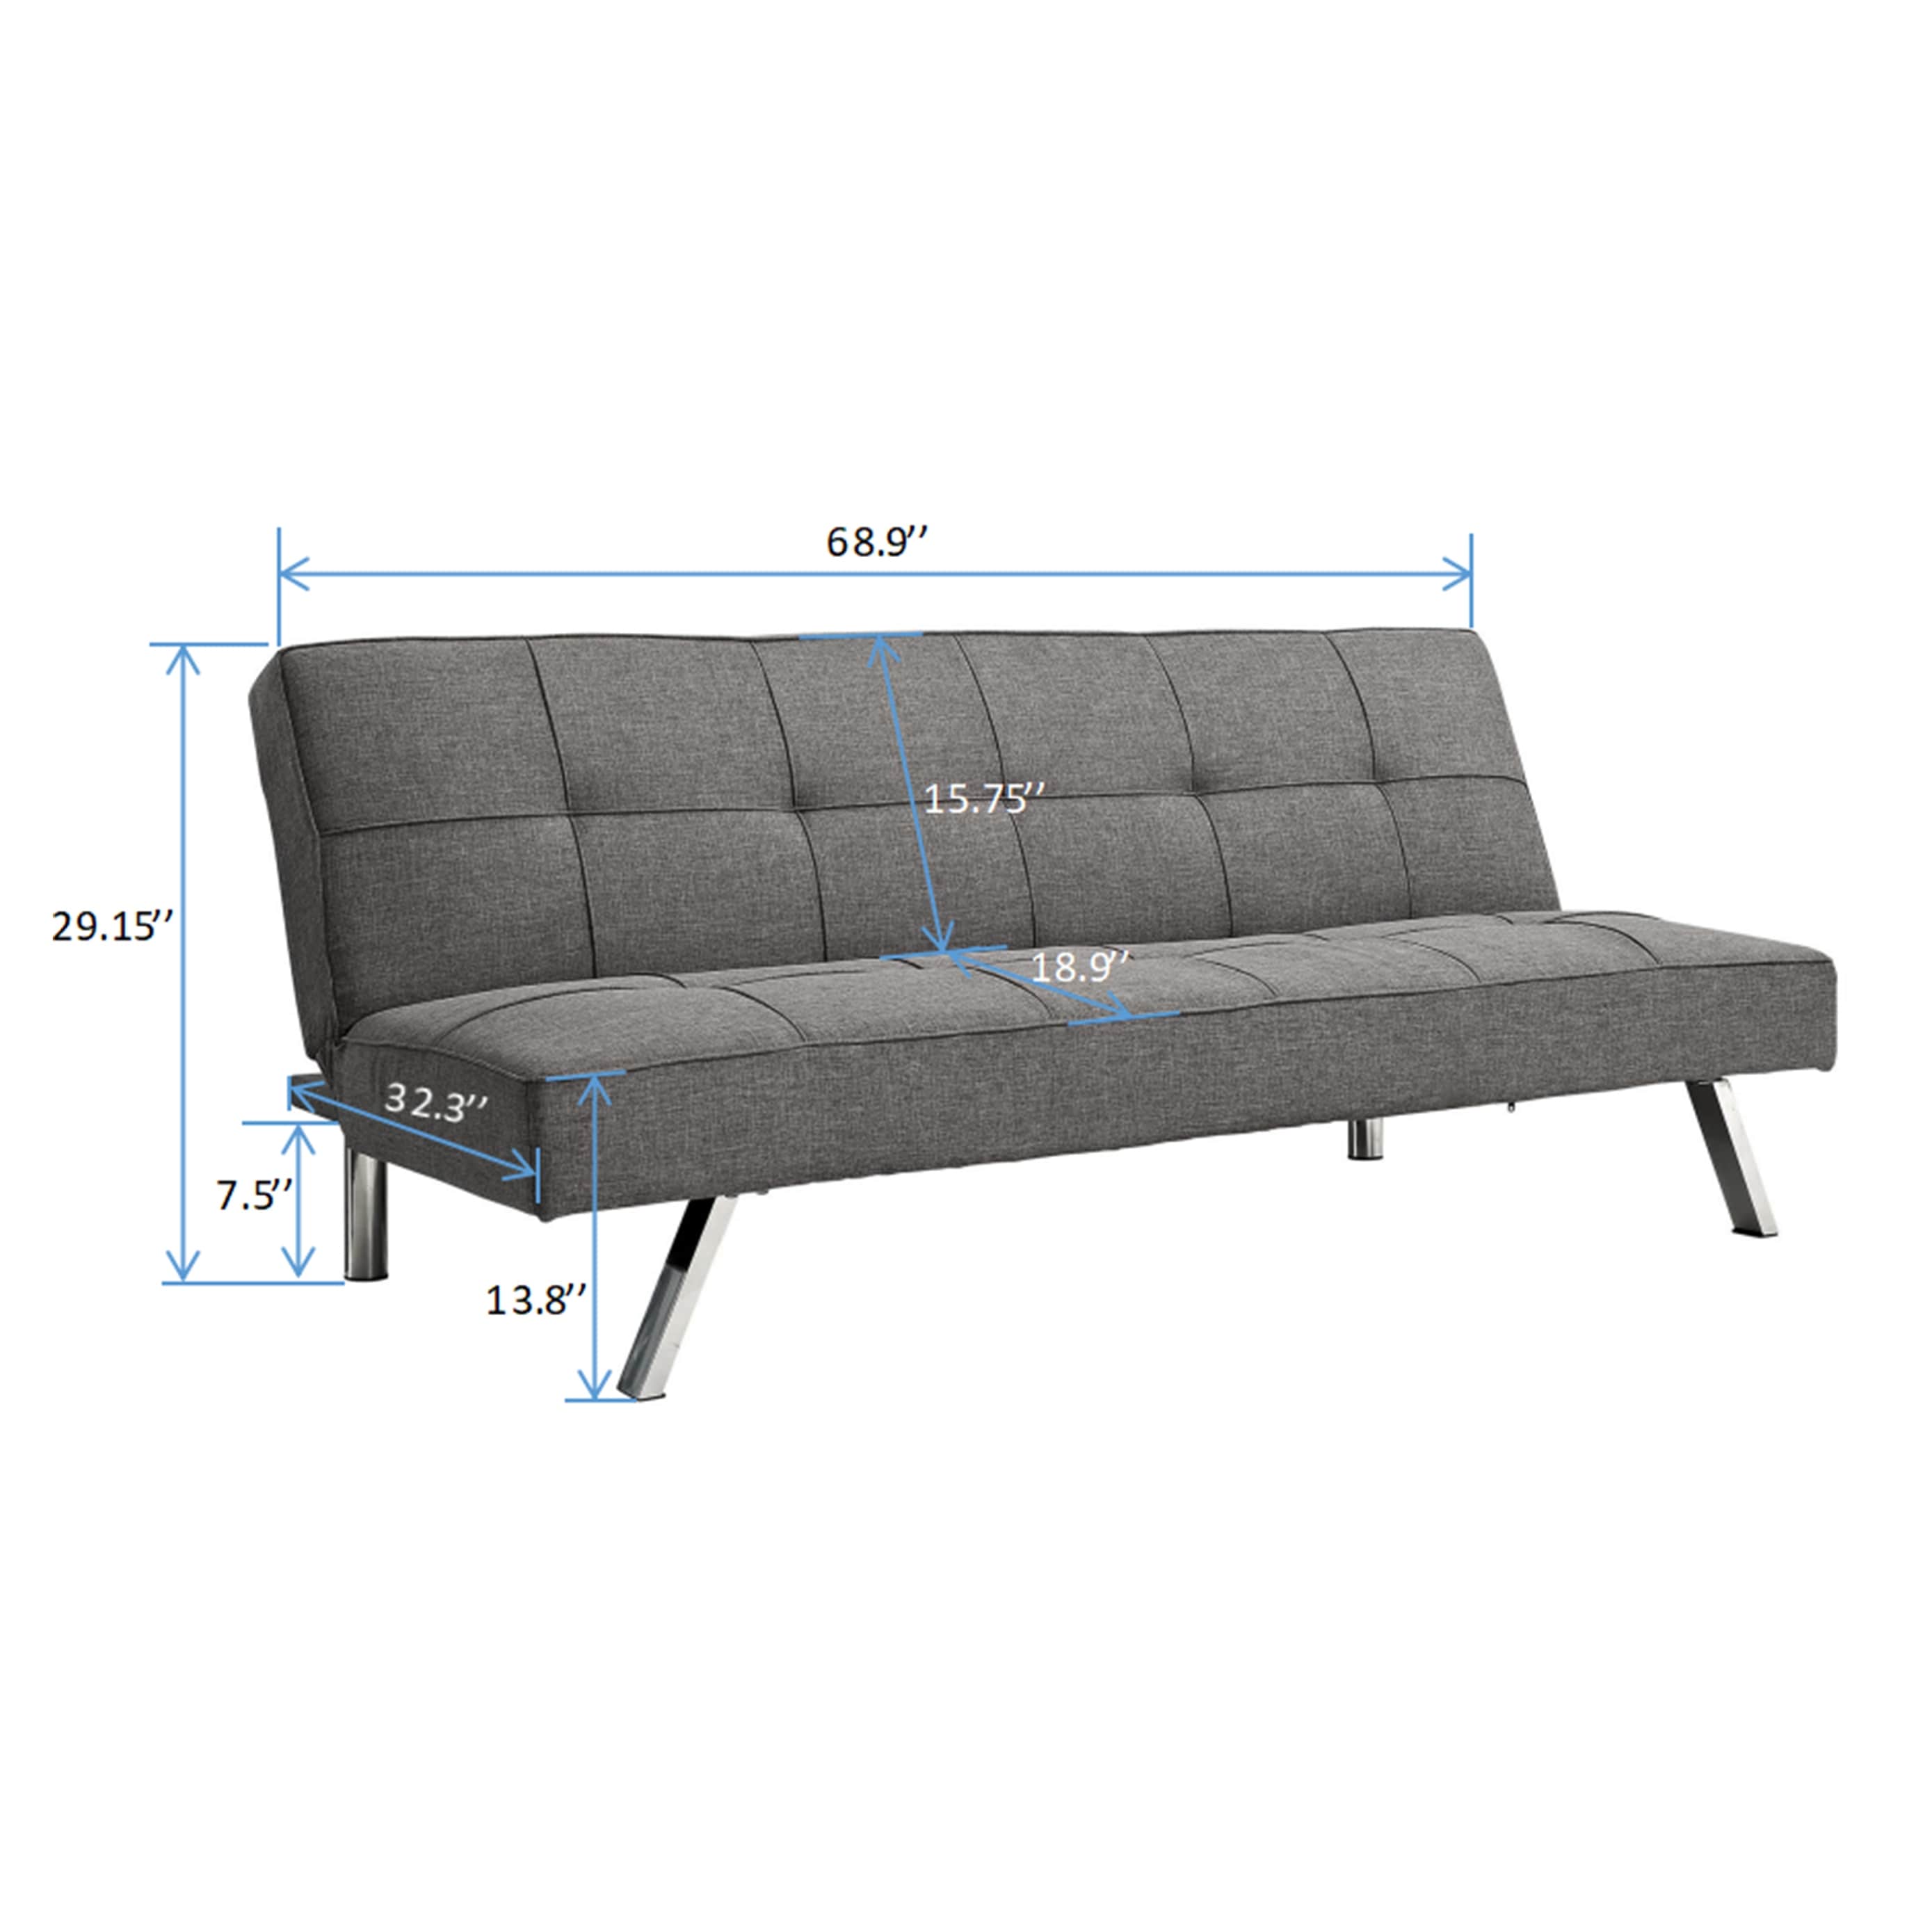 Grey Linen Multifunctional Futon Sofa Bed with Metal Frame